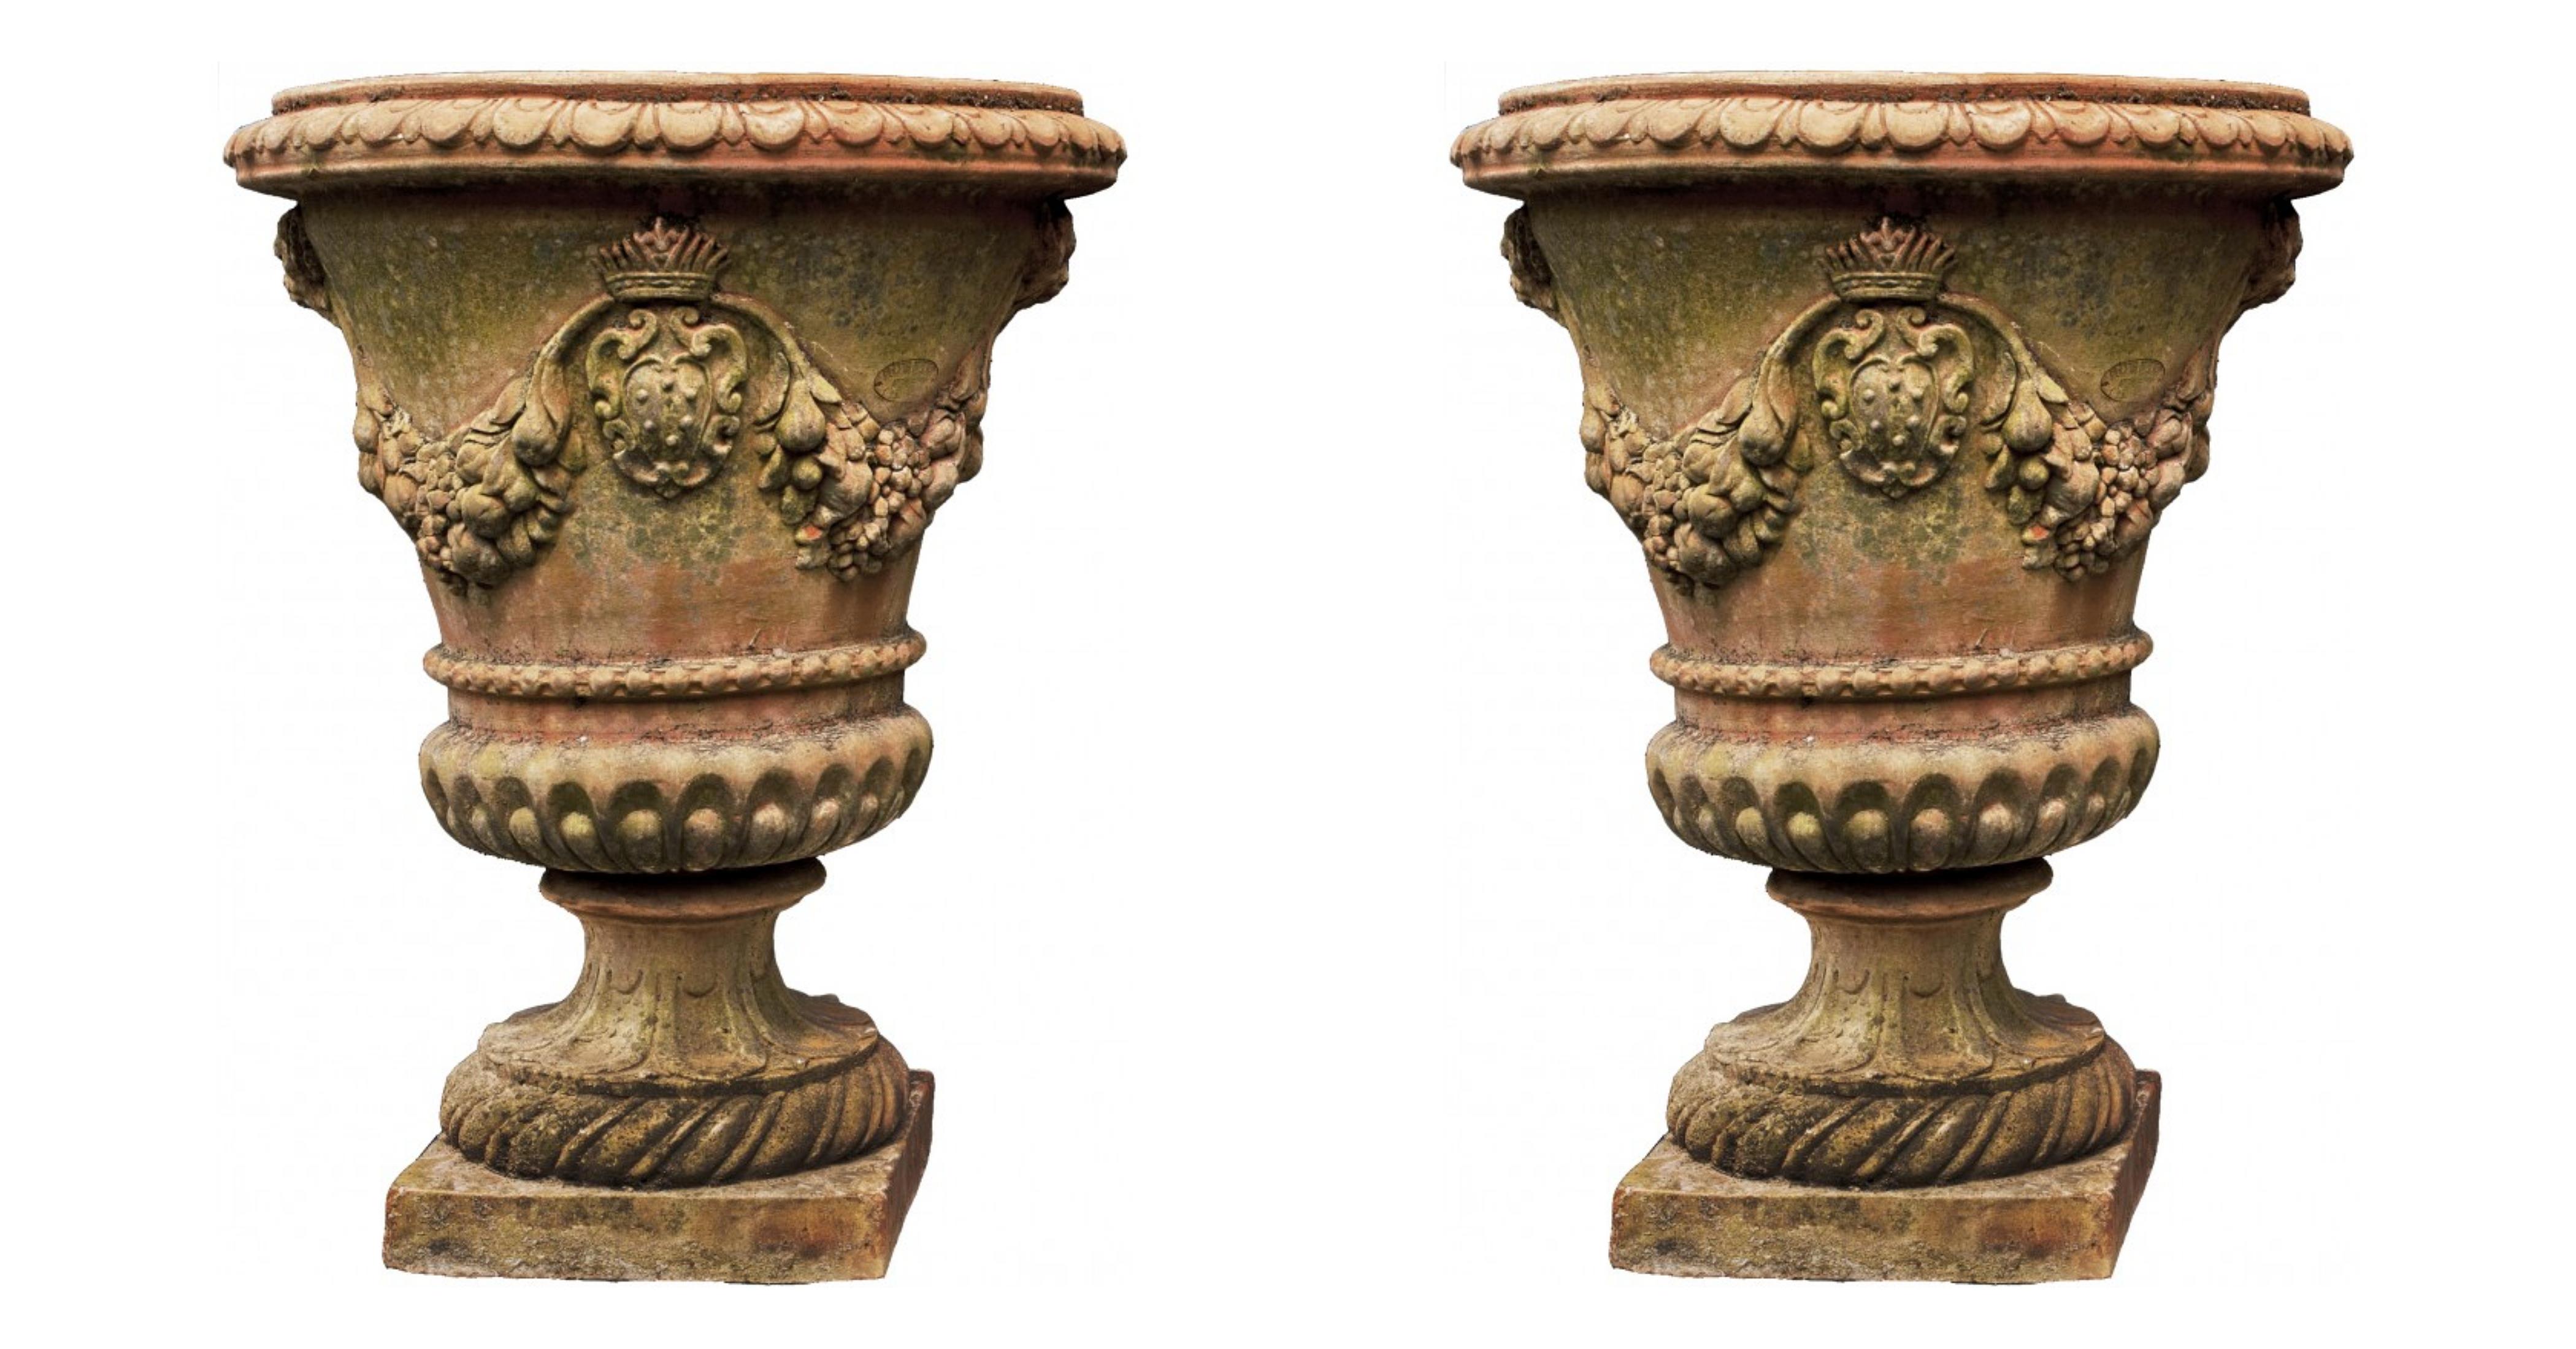 Pair of large 20th century terracotta goblet Medicean vases
Beautiful satyr heads and Medici coats of arms connected to each other by festoons of flowers and fruit.
With various rows of ocelli, spirals and ornamental cords.
Measures: Height